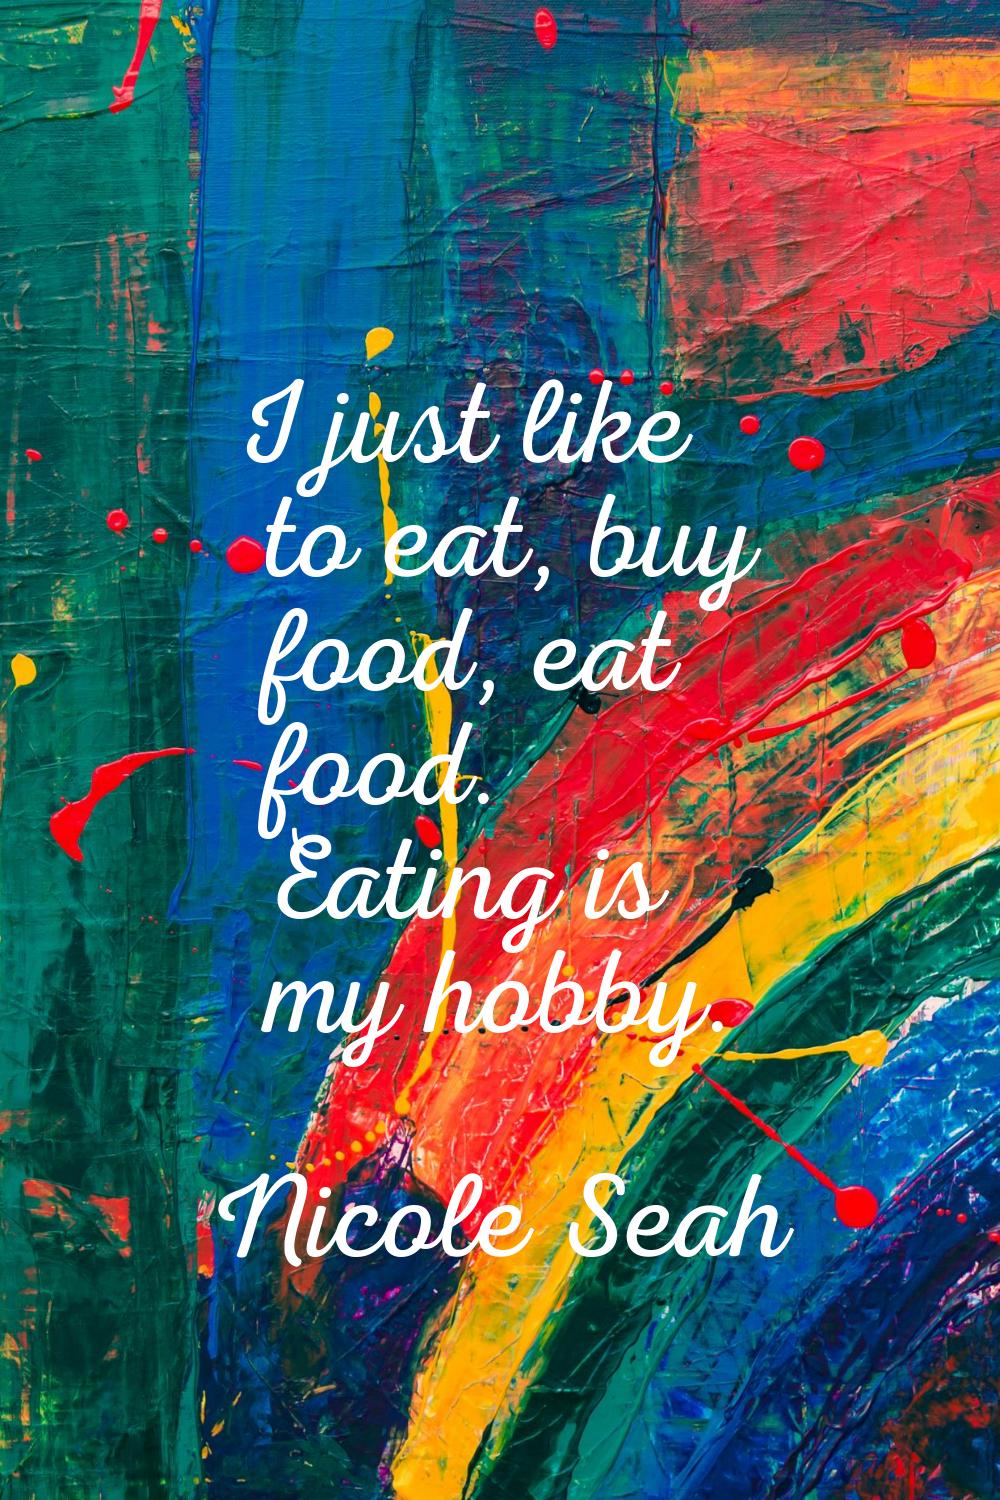 I just like to eat, buy food, eat food. Eating is my hobby.